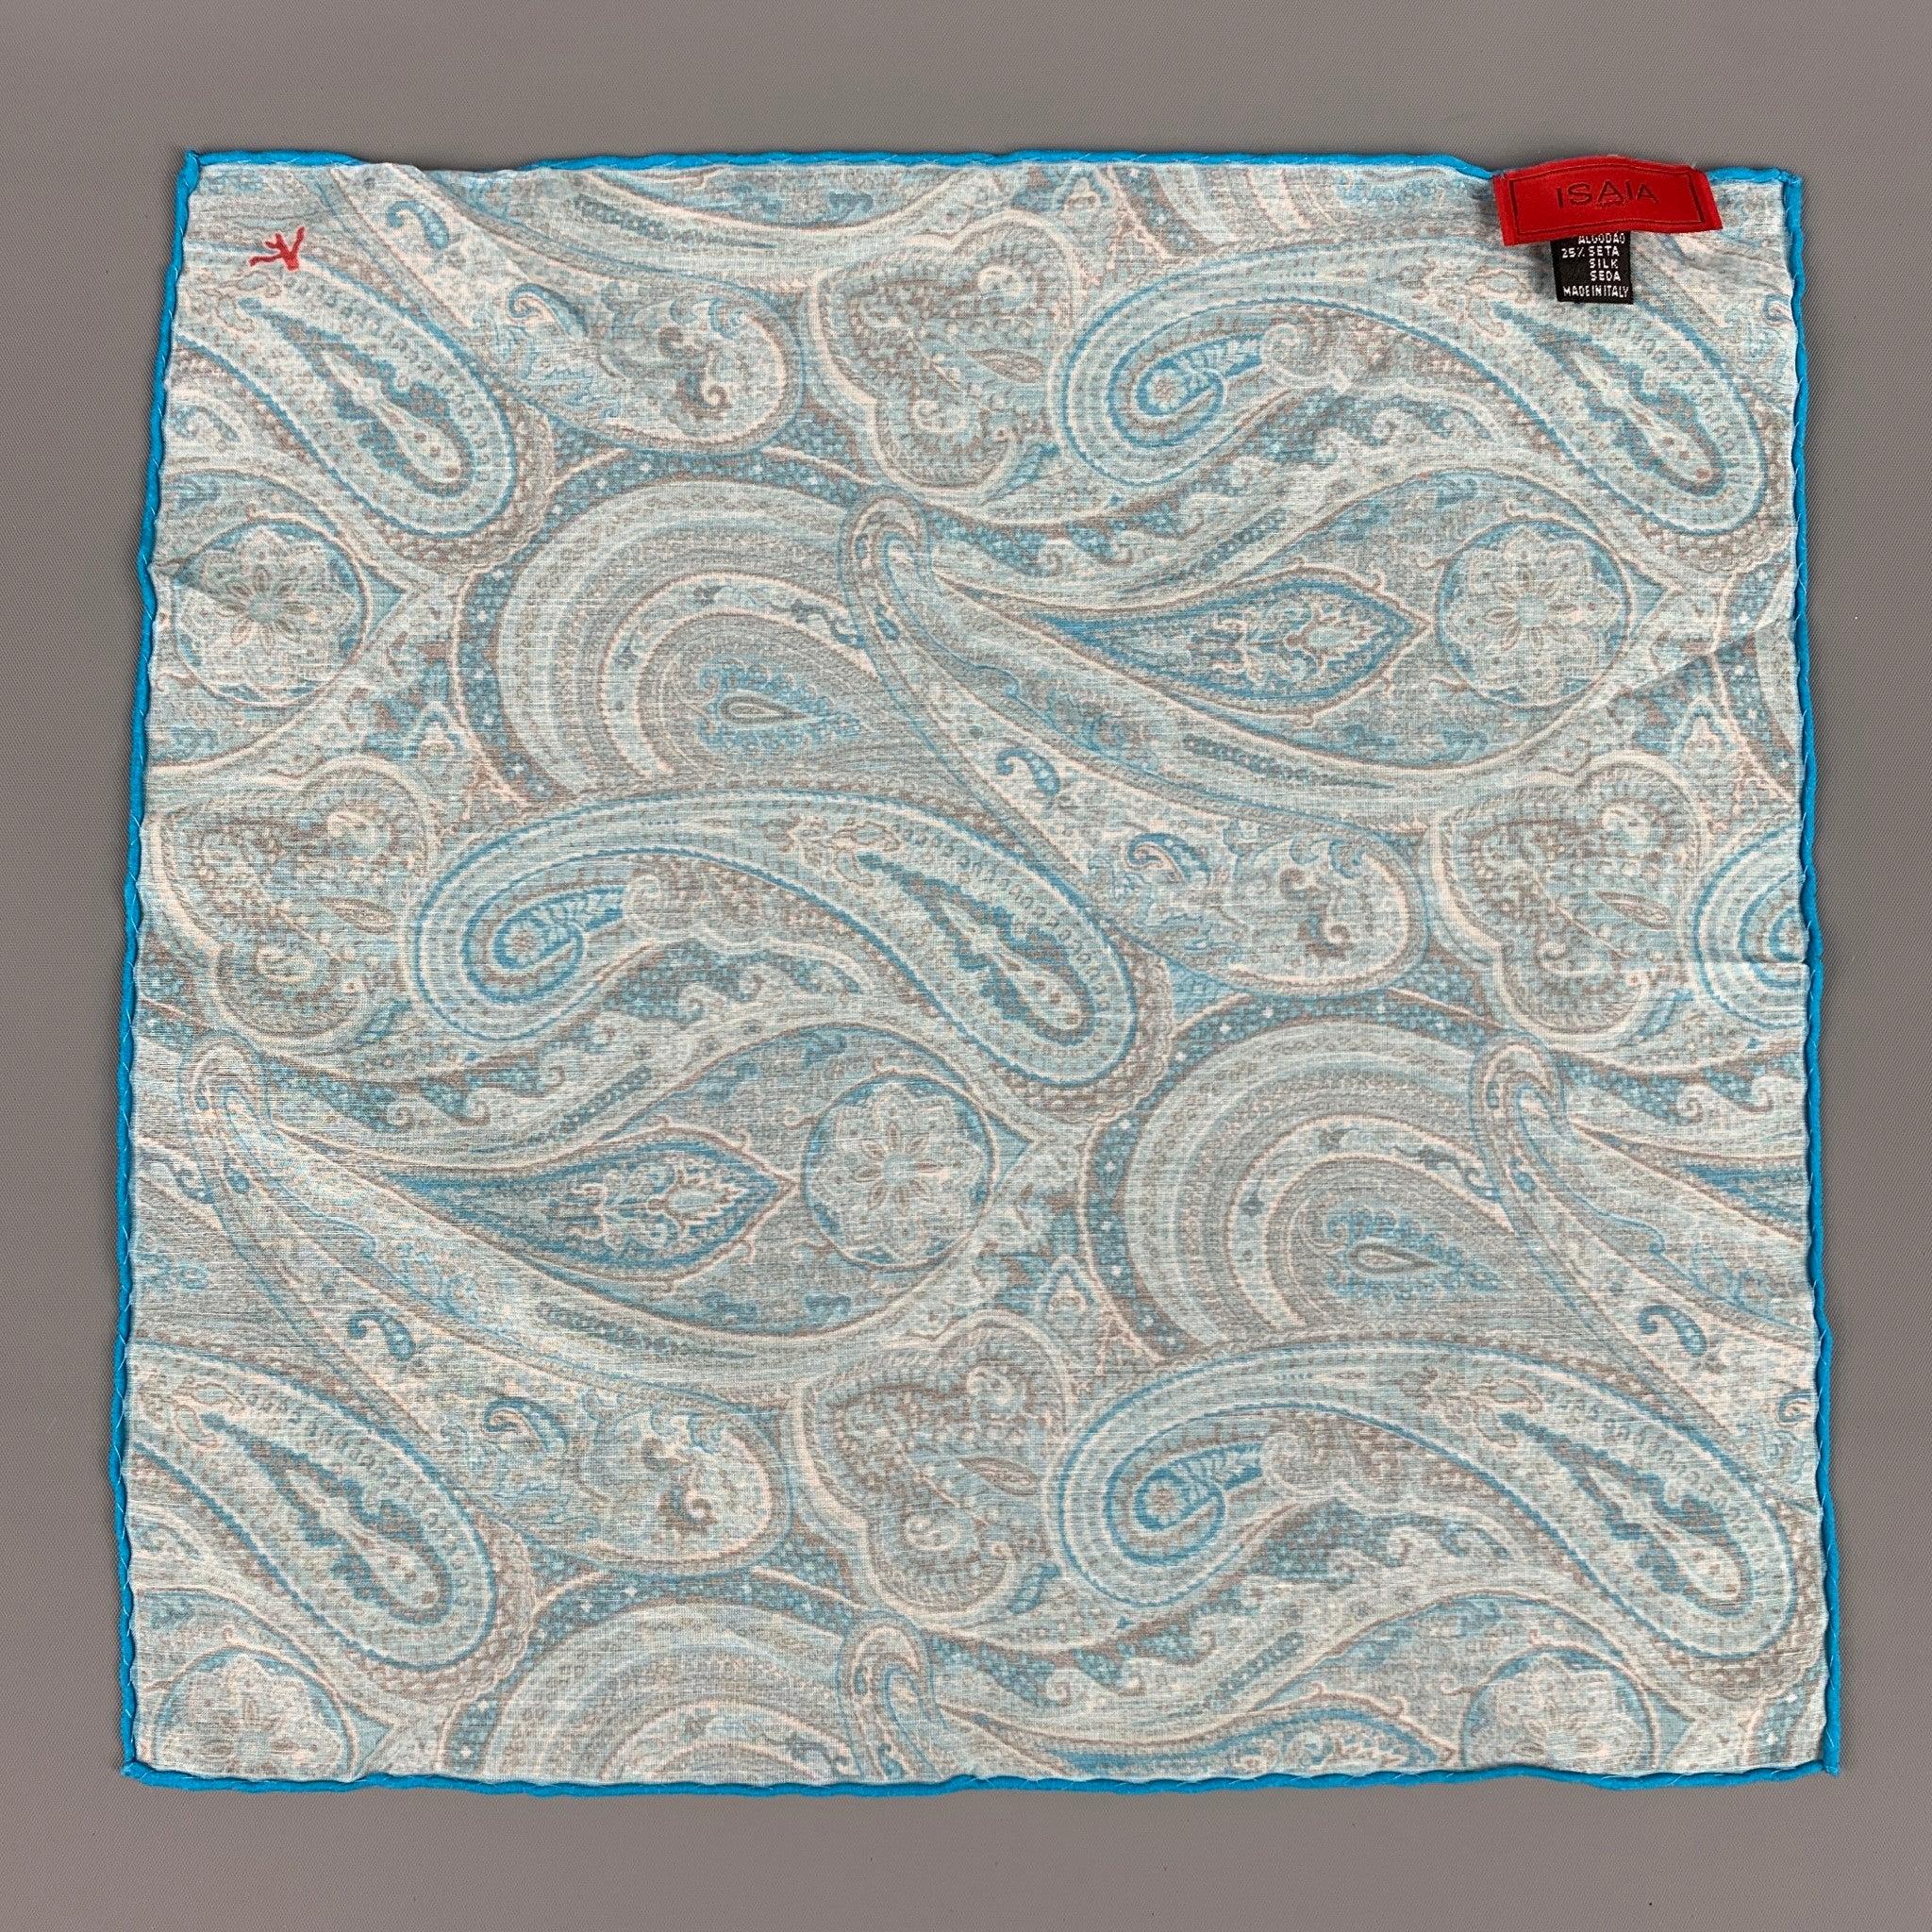 ISAIA pocket square comes in a turquoise & taupe paisley print cotton. Made in Italy.
Very Good
Pre-Owned Condition. 

Measurements: 
  12 inches  x 11.5 inches 
  
  
 
Reference: 114856
Category: Pocket Square
More Details
    
Brand: 